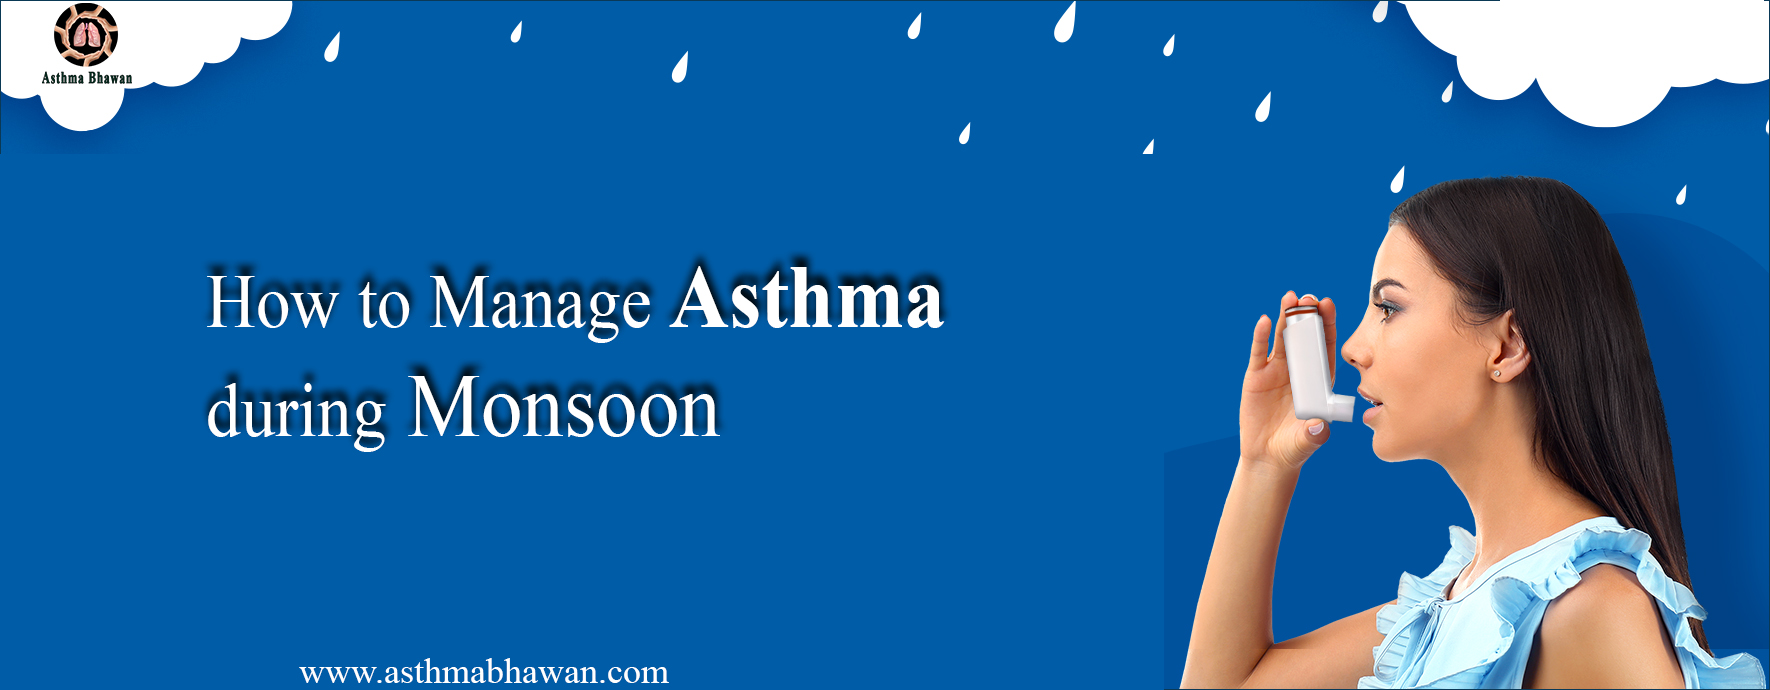 How to Manage Asthma during Monsoon